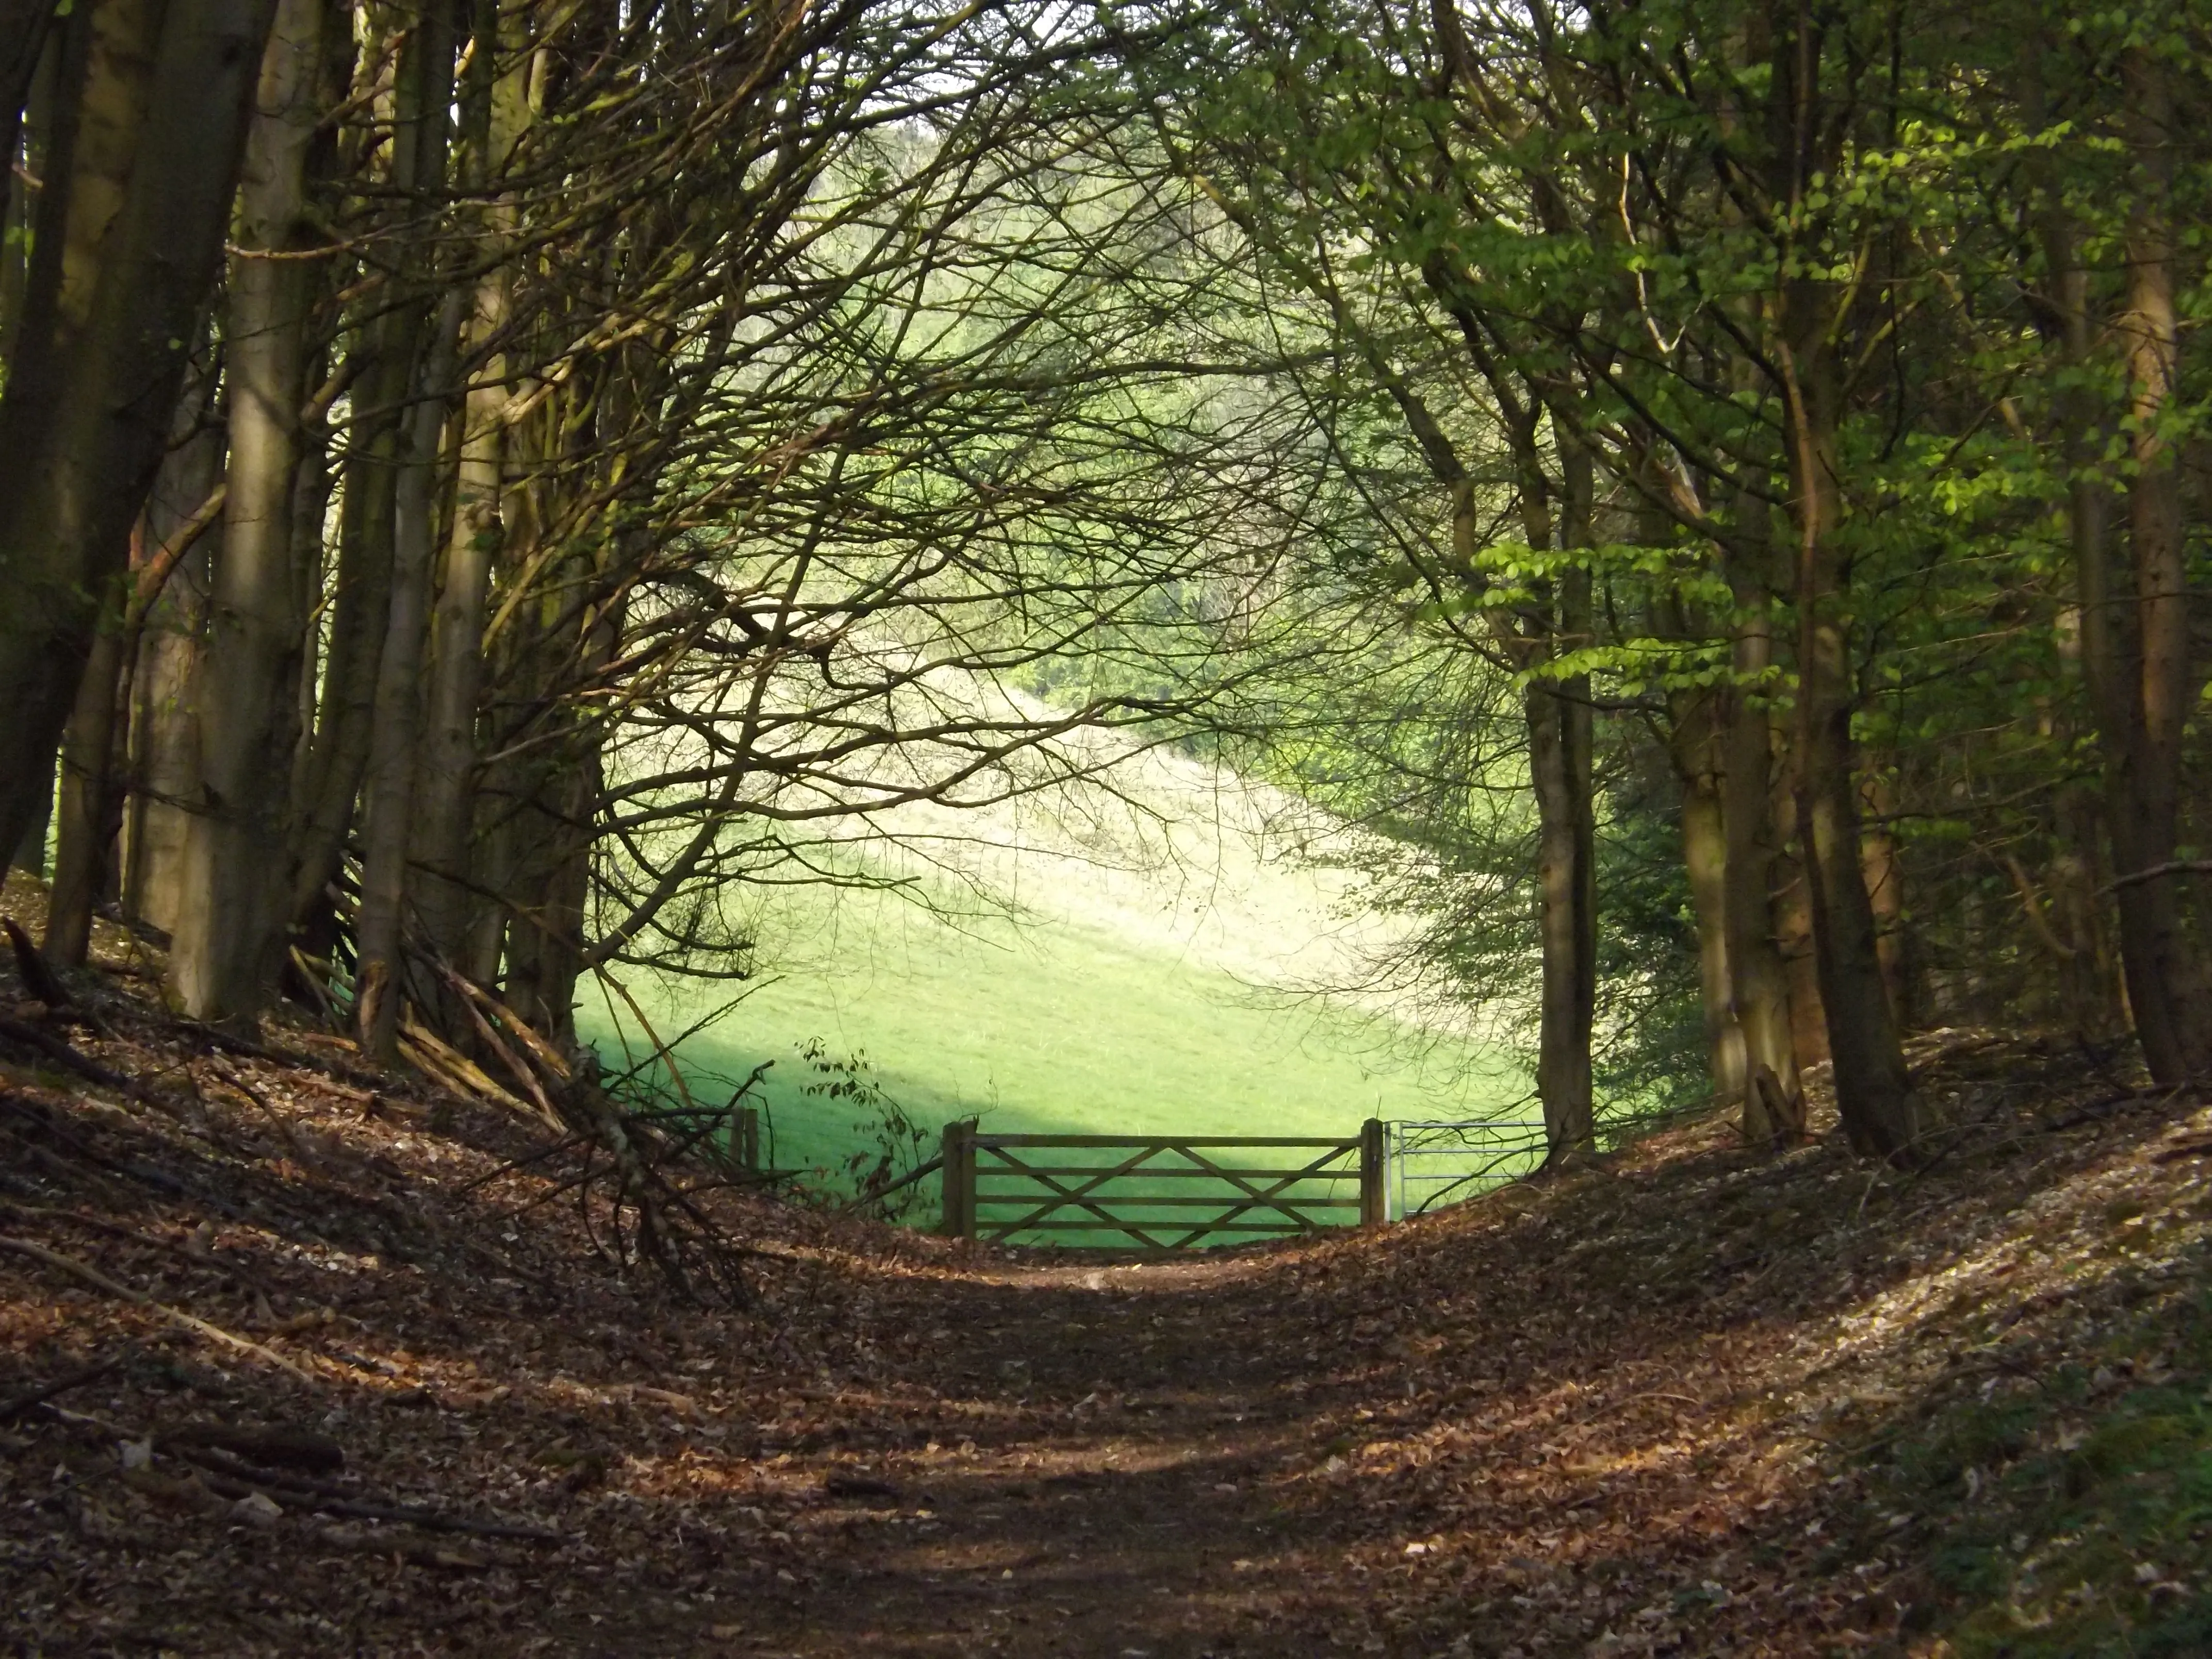 Photograph of Frendal Dale, Yorkshire Wolds